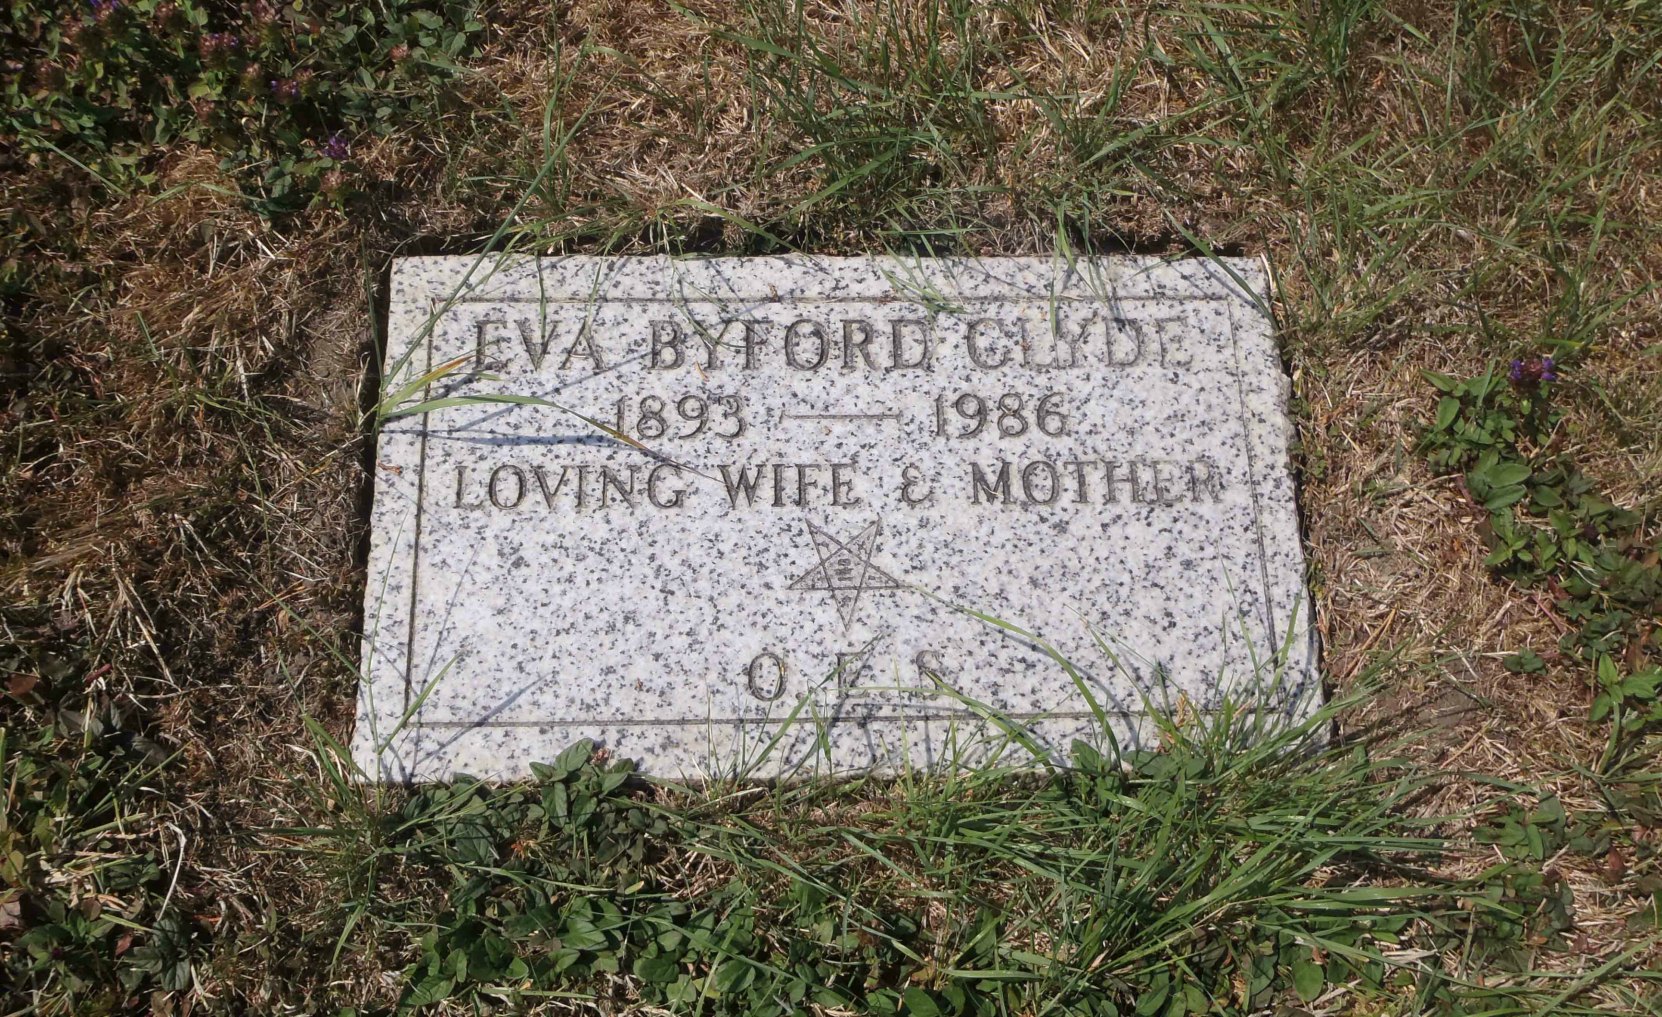 Eva Byford Clyde grave marker, Holy Trinity Anglican cemetery, North Saanich, B.C.